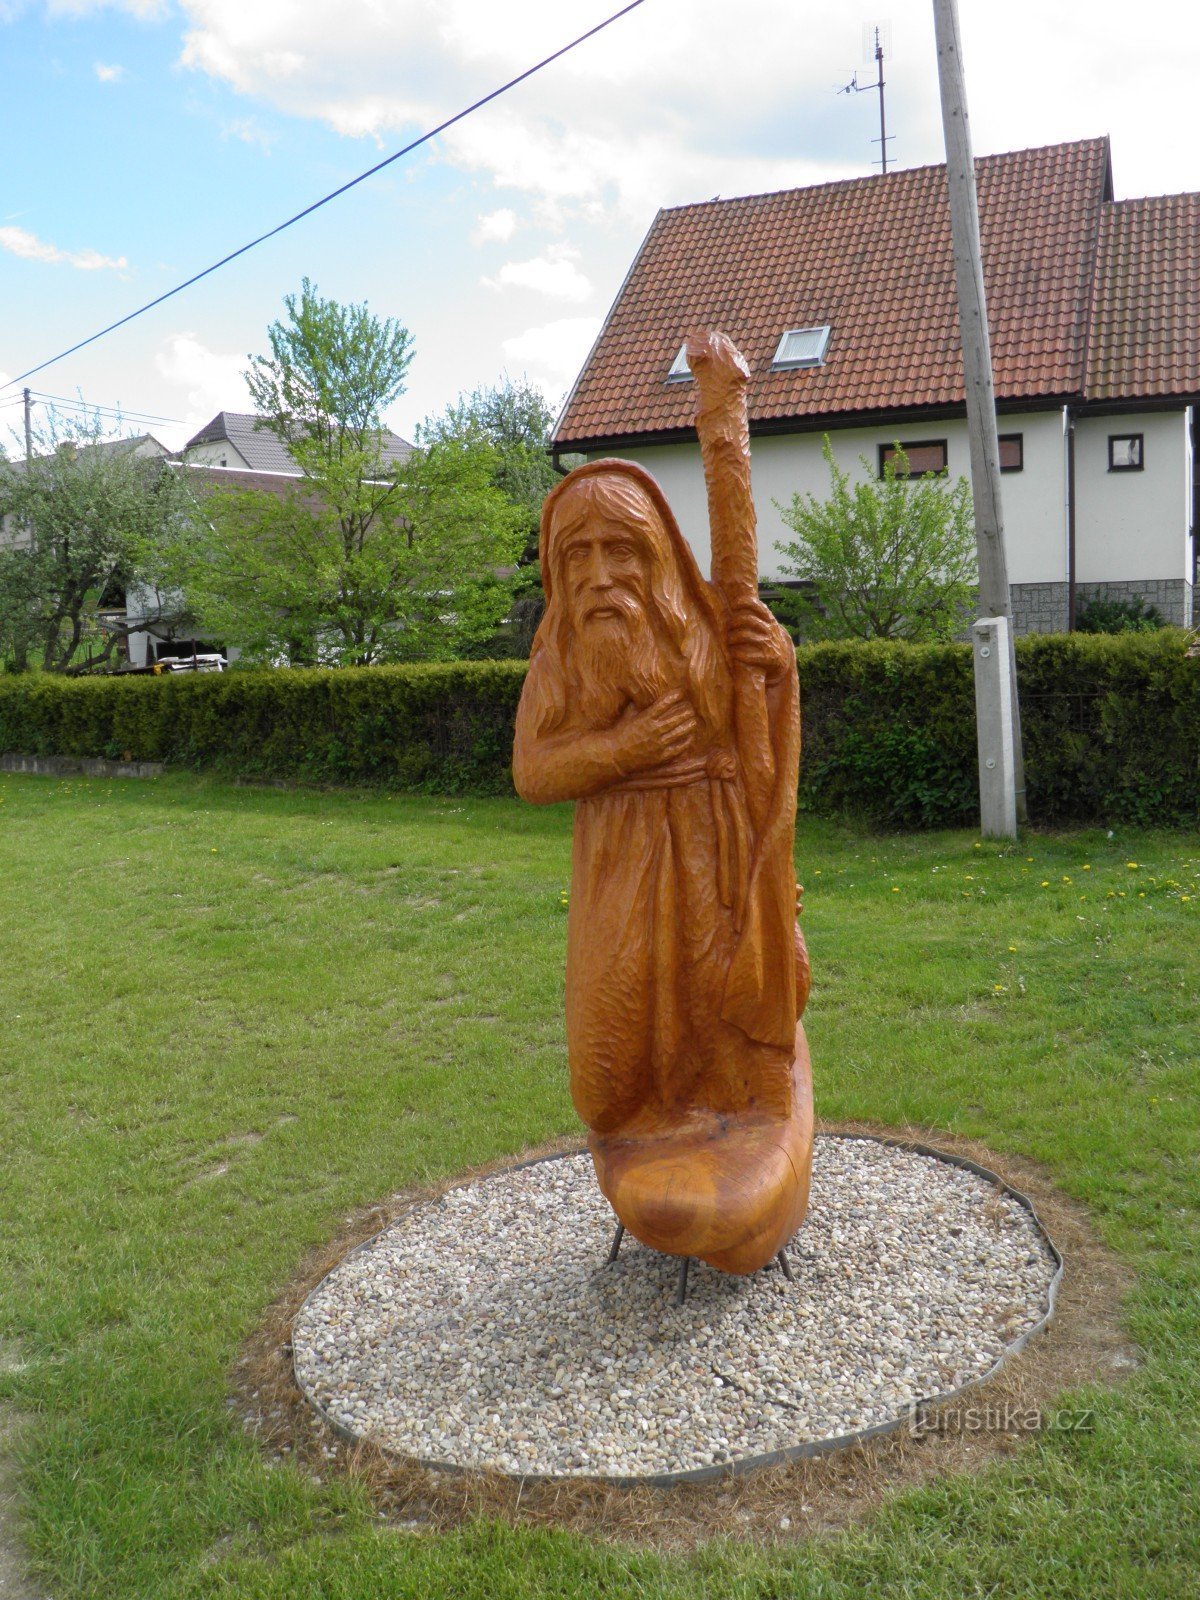 Wooden sculptures of St. Wenceslas and the Pilgrim in Rohozná